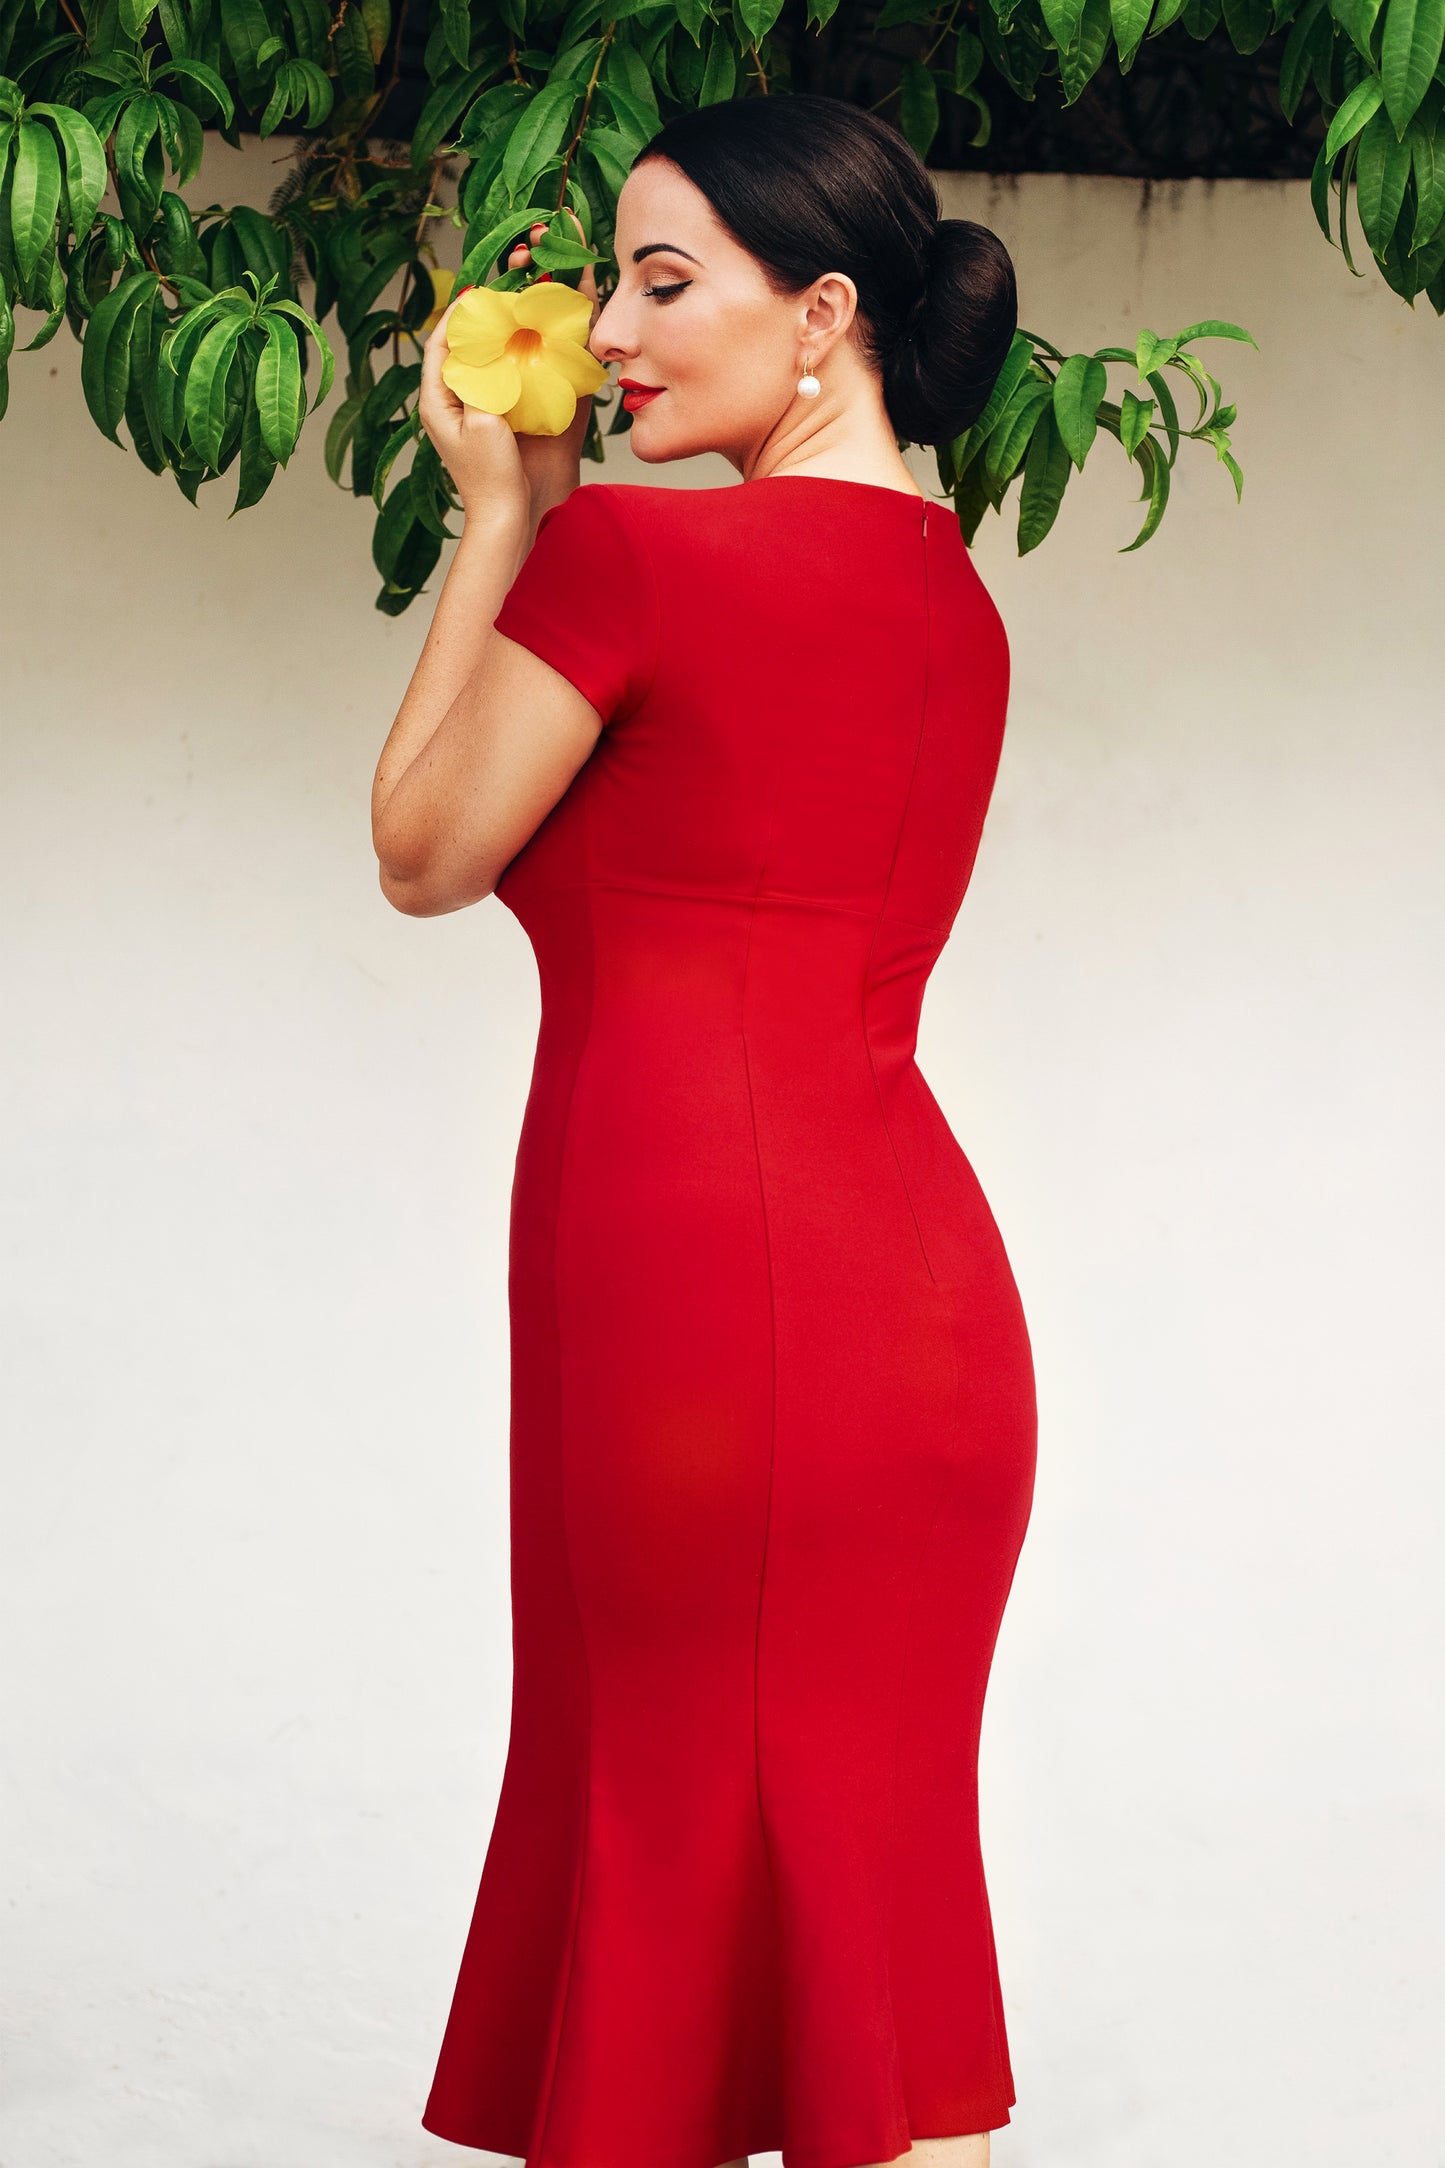 The Joyceleen Pencil Dress in Imperial Red